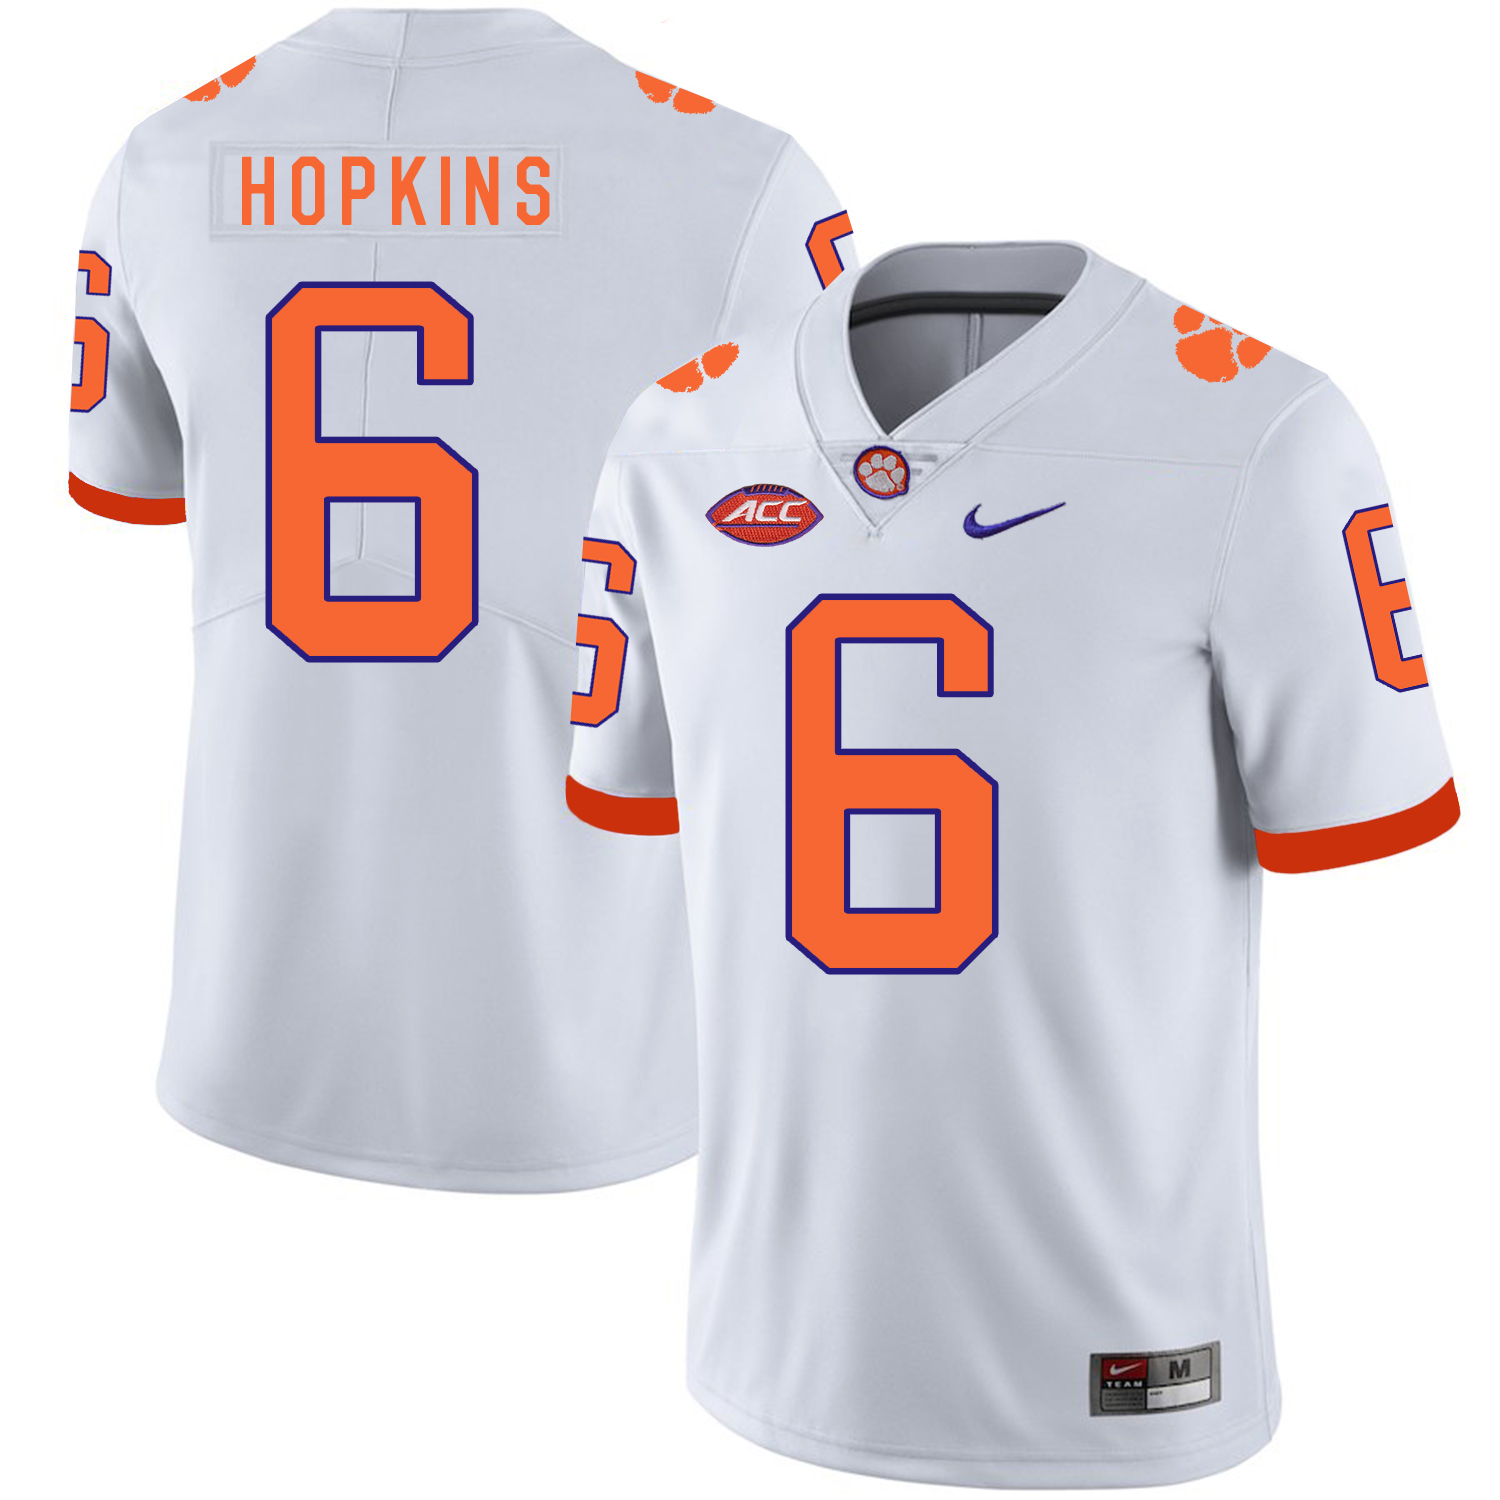 Clemson Tigers 6 DeAndre Hopkins White Nike College Football Jersey